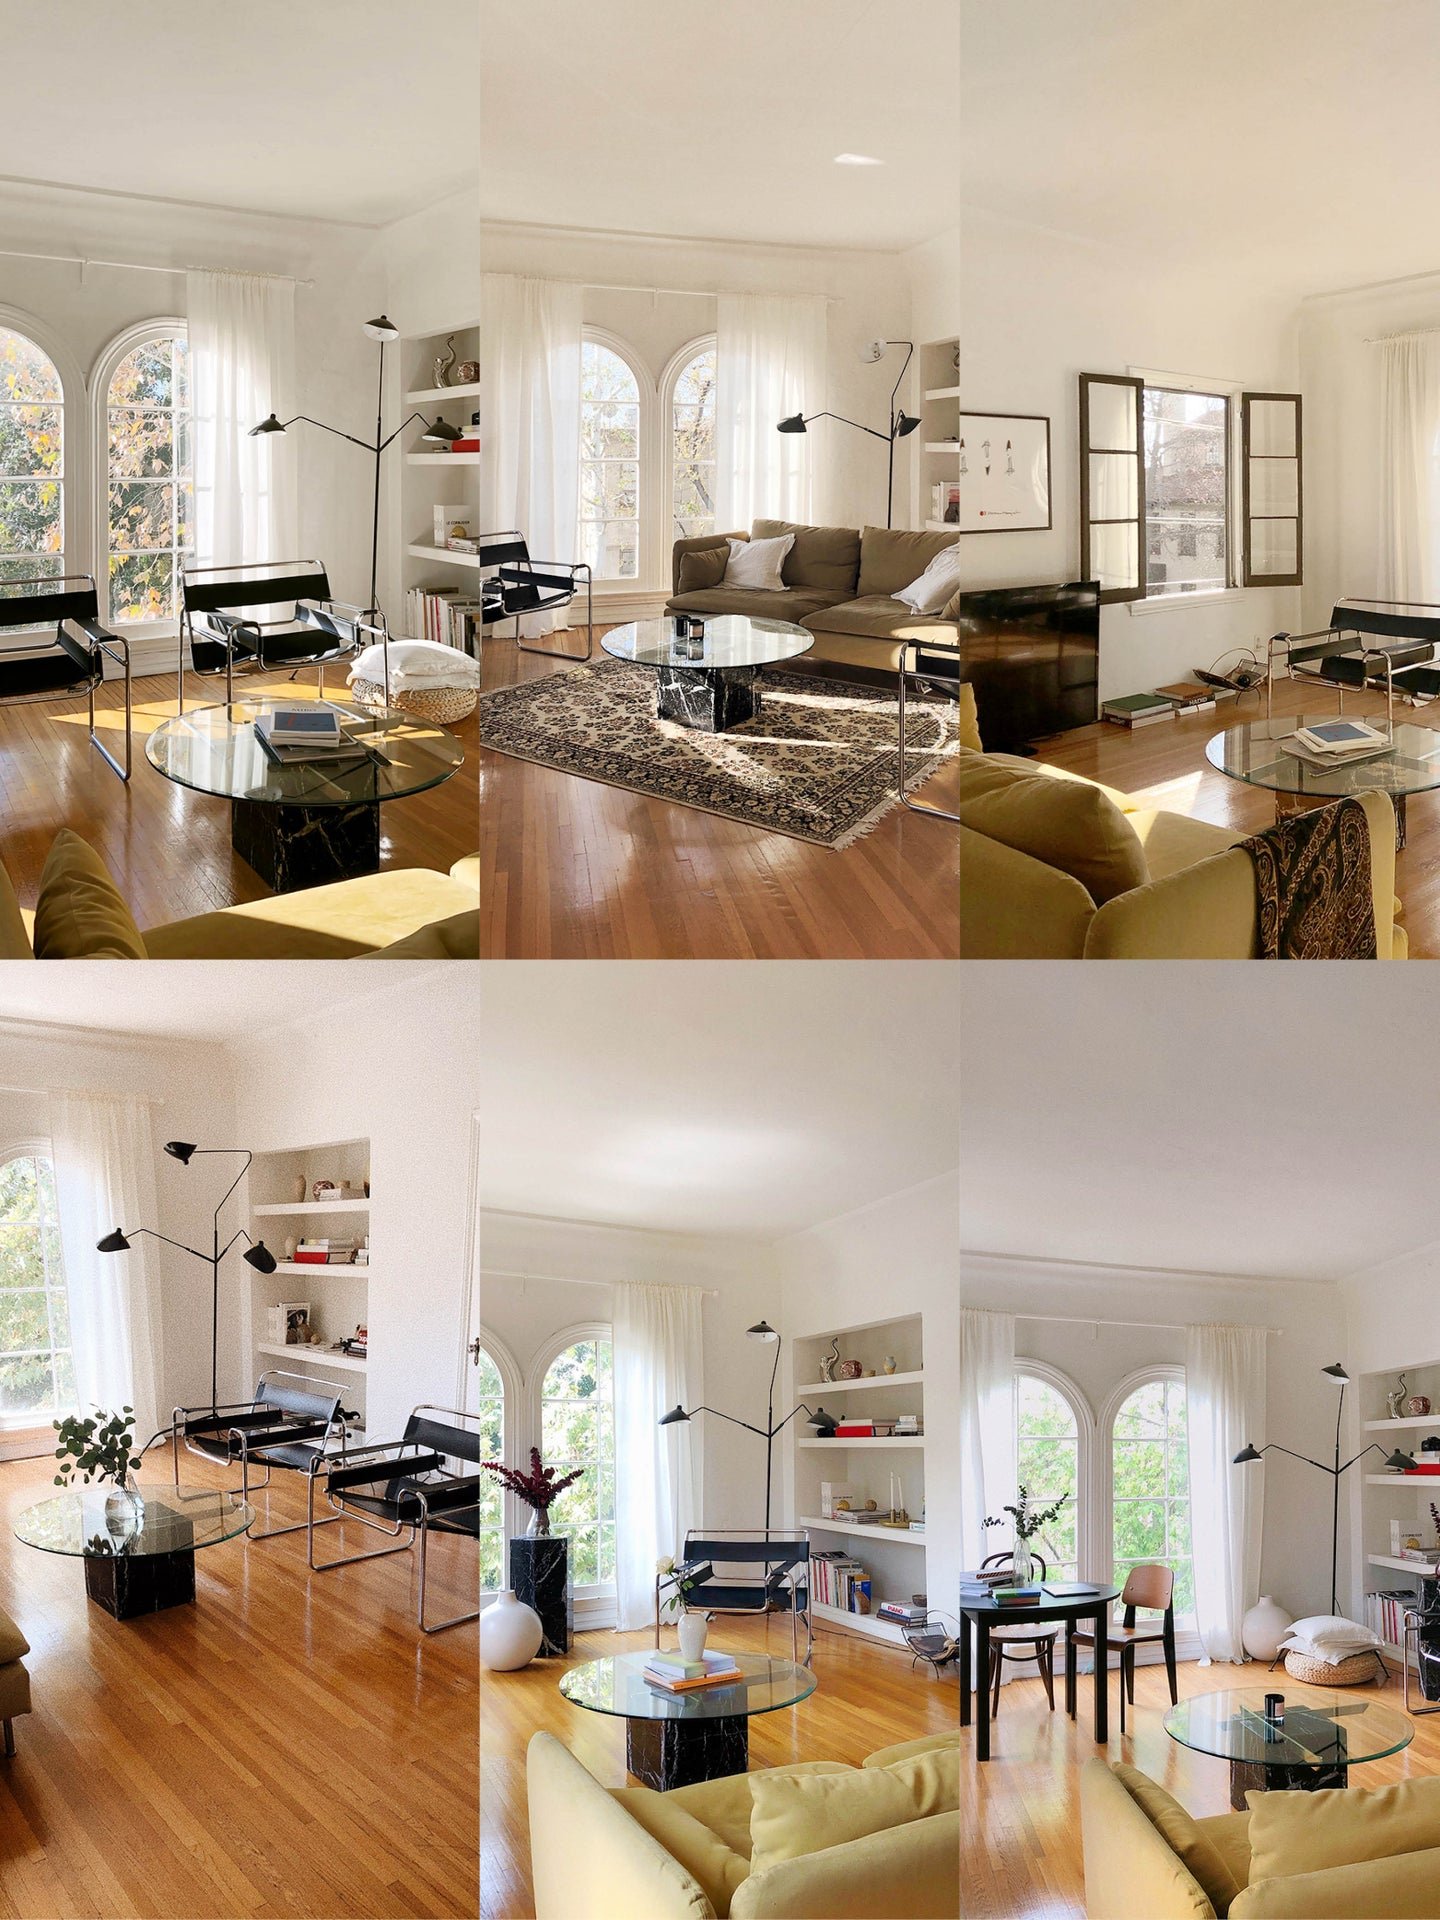 One Living Room, 6 Ways, All With the Same Furniture